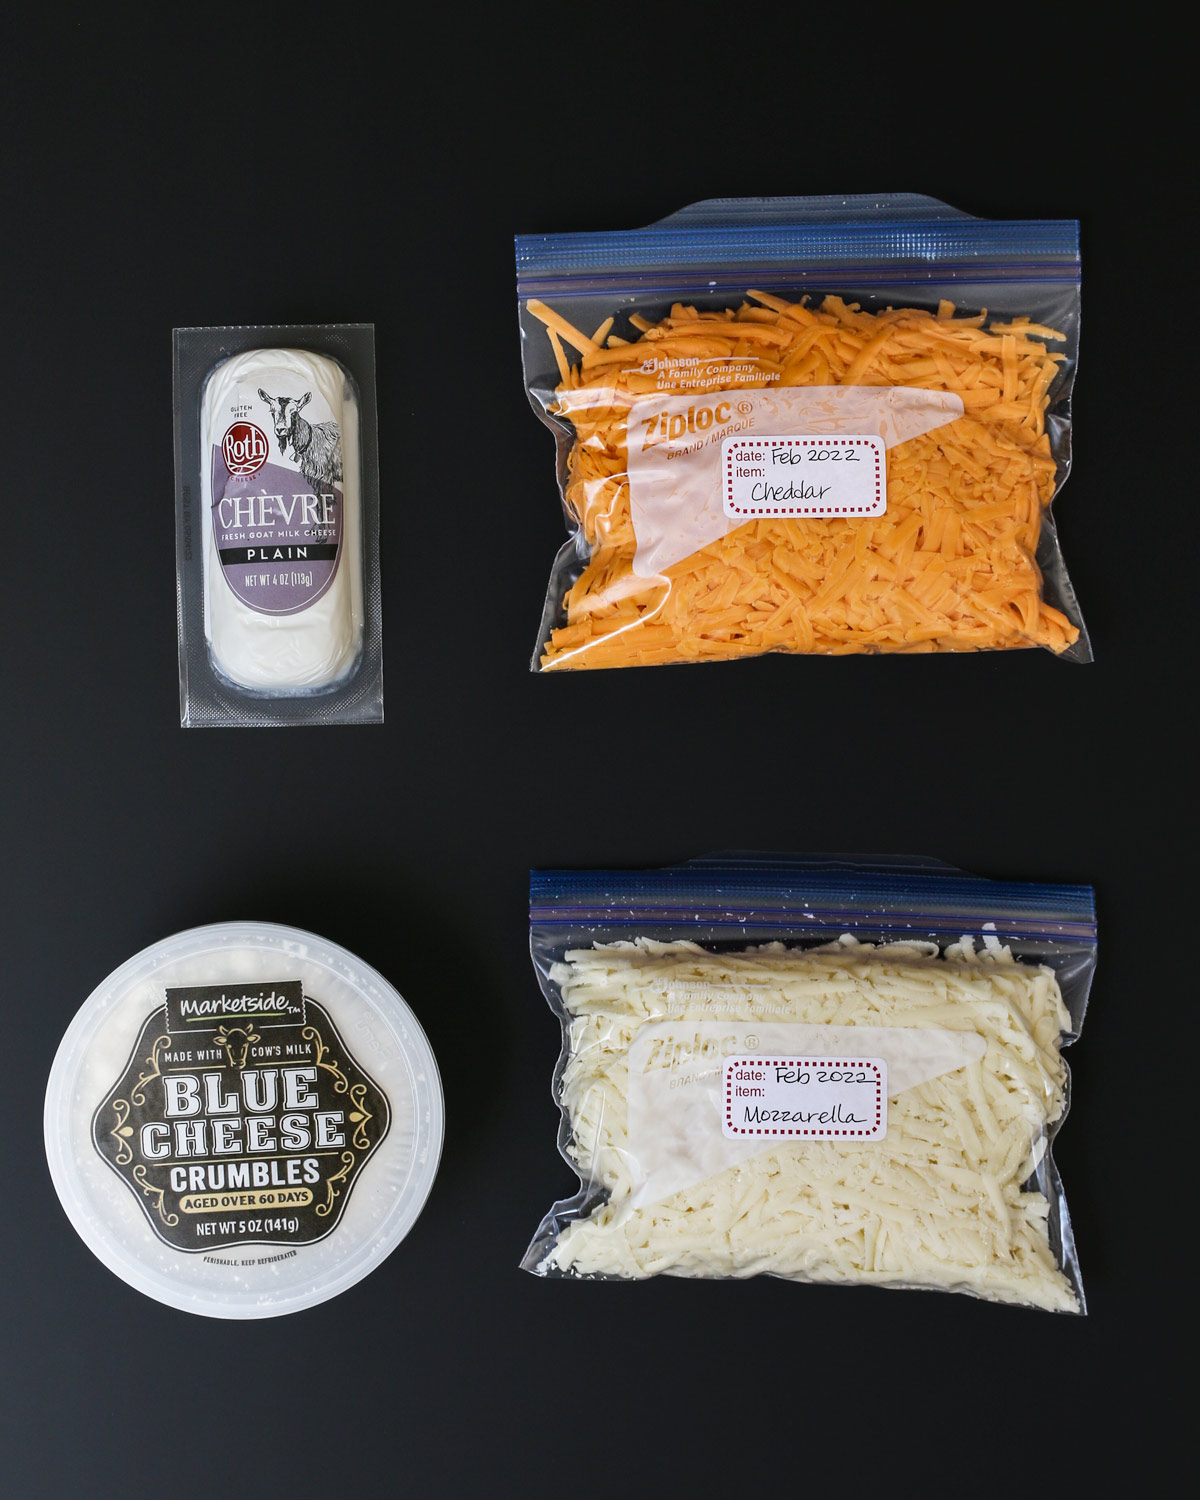 package of goat cheese, tub of blue cheese crumbles, and bags of cheddar and mozzarella cheese on black table.